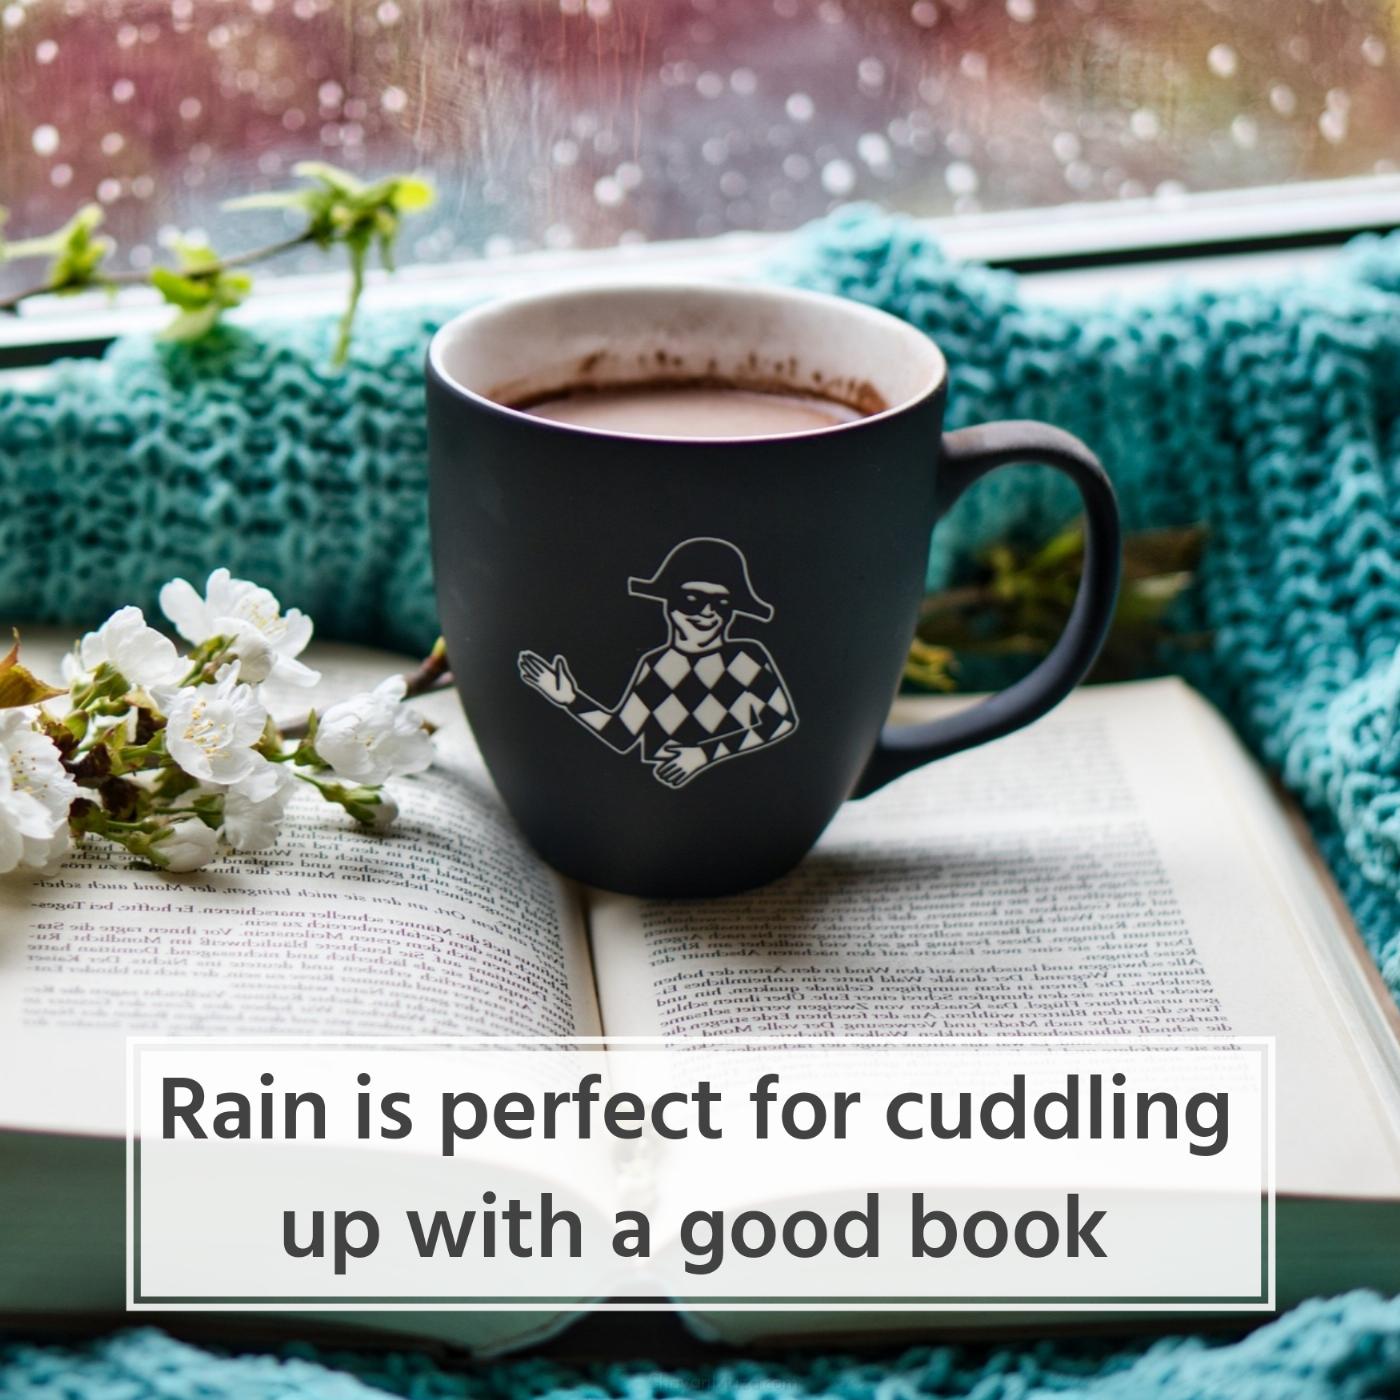 Rain is perfect for cuddling up with a good book